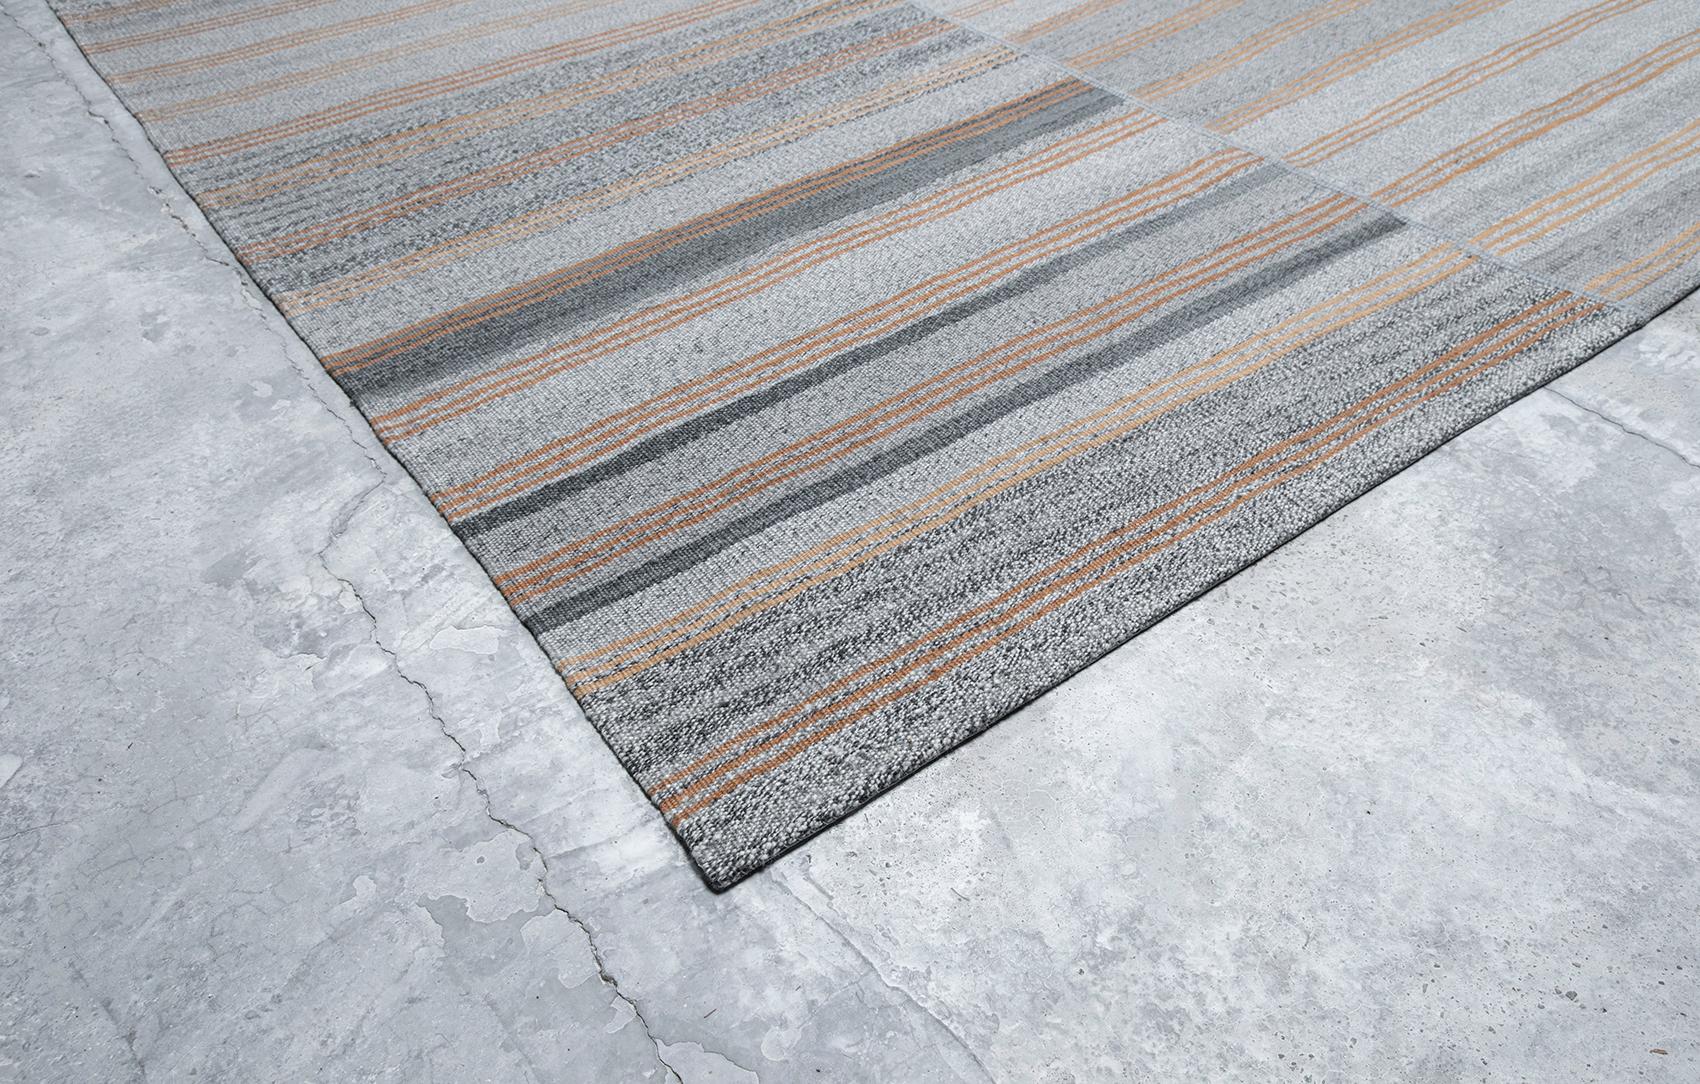 Made in Afghanistan in the style of our Mazandaran collection which highlights the Minimalist sophistication that existed long before the modern era. The collection was inspired by the kilims that were woven by Persian women in the Mazandaran